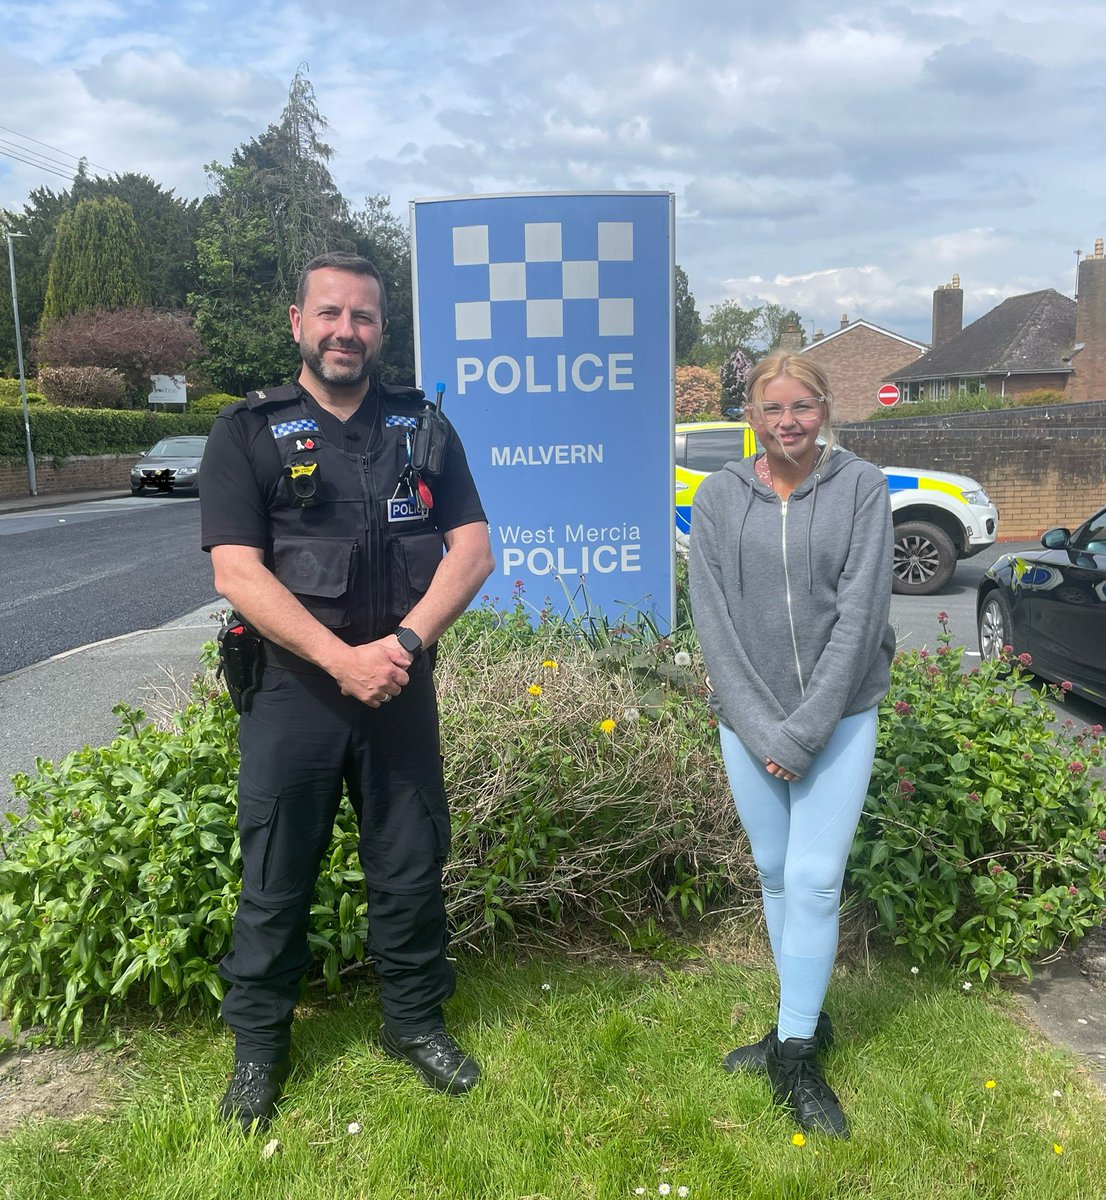 Today PC Kev Johns, PC Dee Stanley & volunteer Bryony with @WorcsTS visited shops in Malvern test purchasing for Vapes & Alcohol. 2 out of 7 failed and sold to the underage person. Appropriate action will now be taken on those who failed! #TeamWork #Partnership 👮🏻